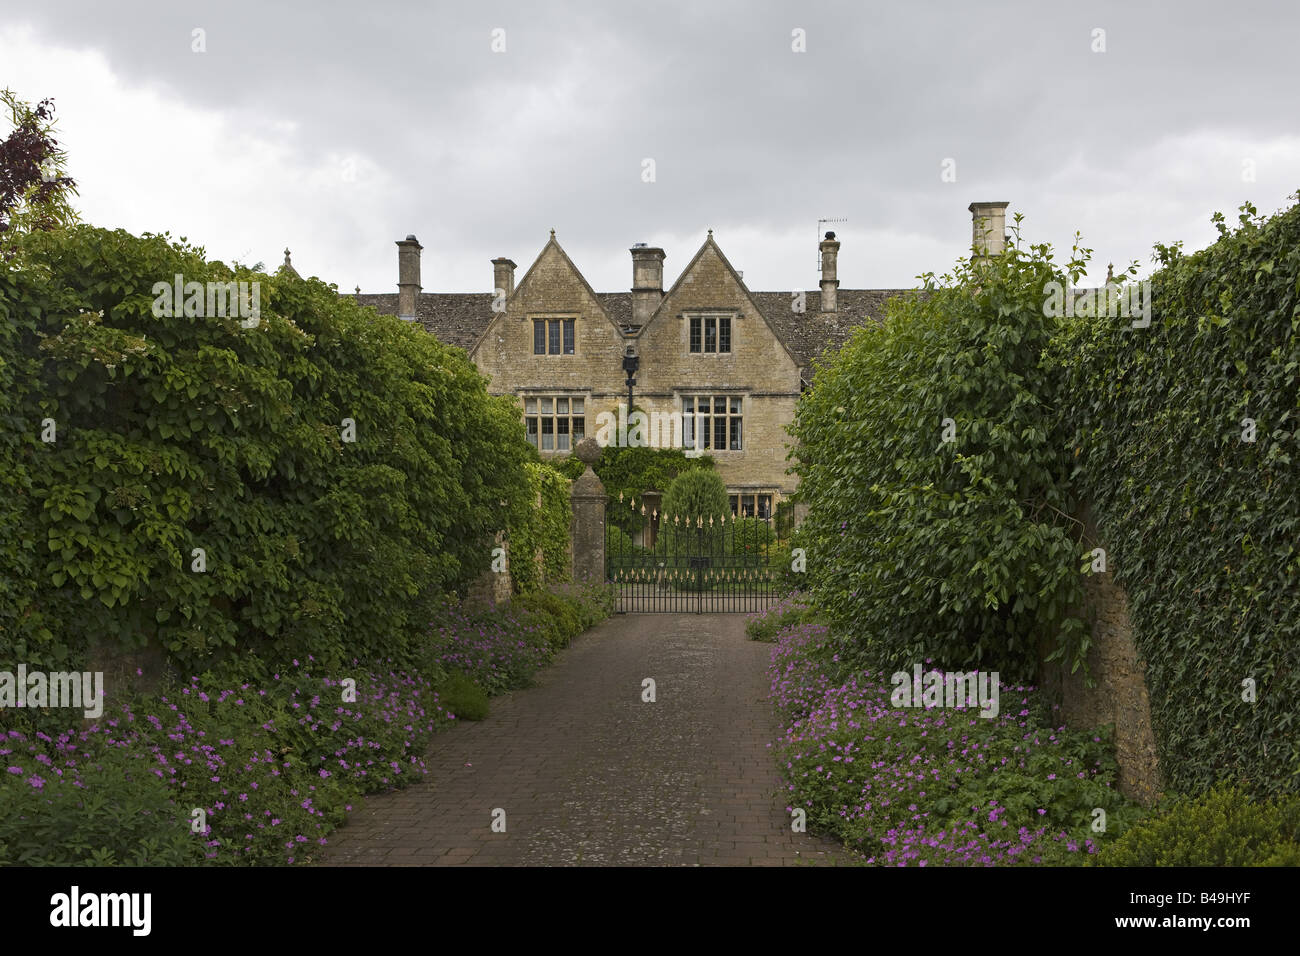 Cotswold's Family Mansion House Viewed Down Shrubbery & Flower Lined Drive Through Gates Stock Photo